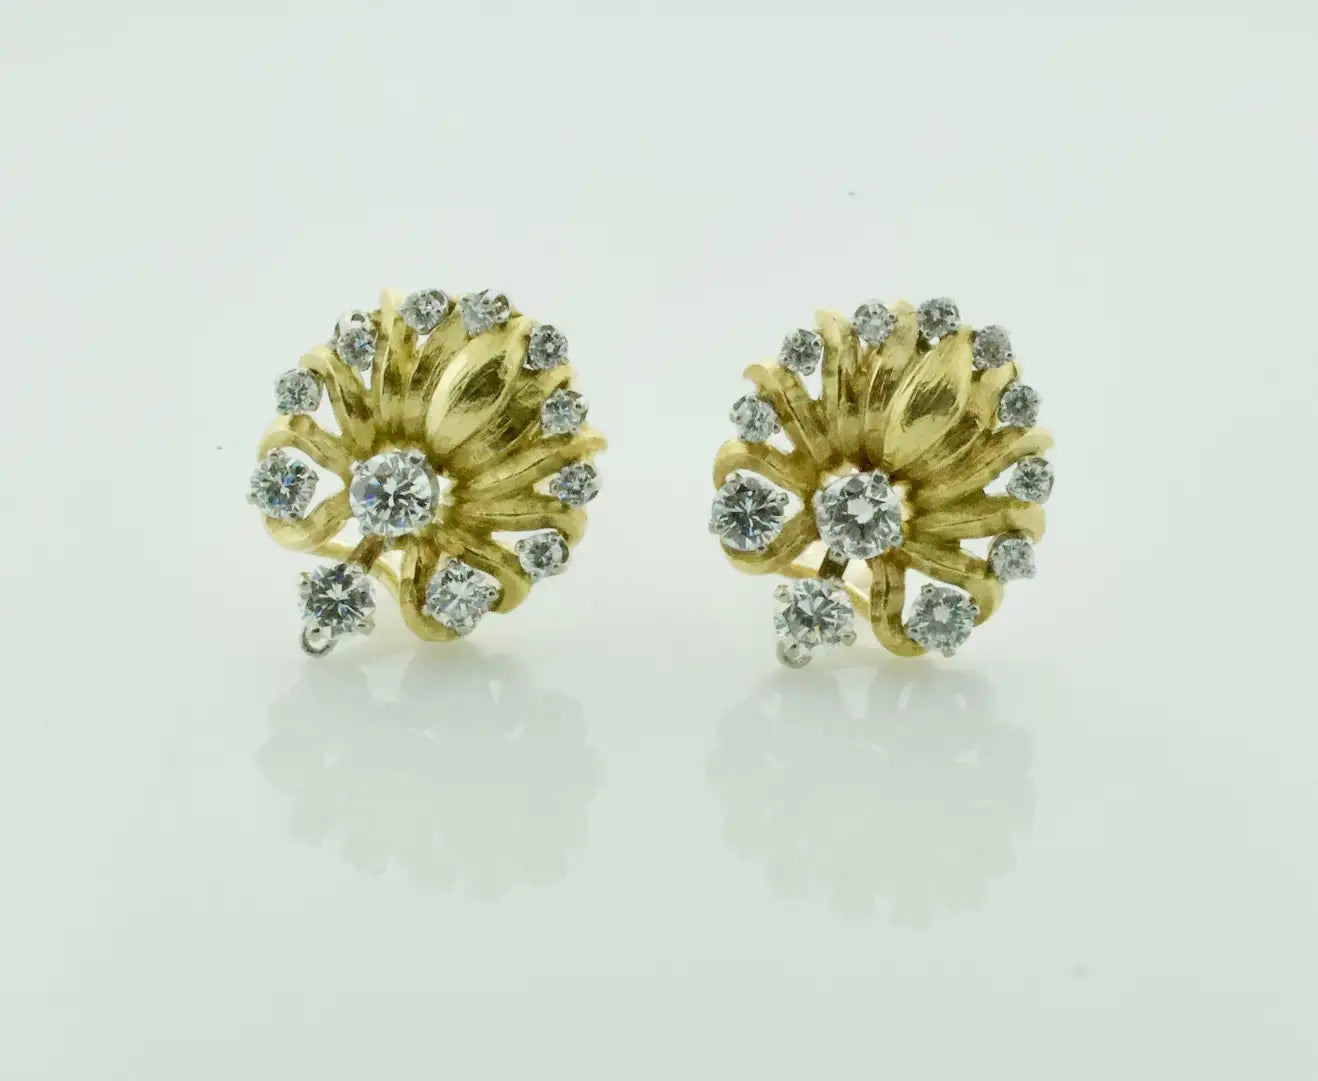 Delightful 18k Yellow and White Gold Earrings, Circa 1950's